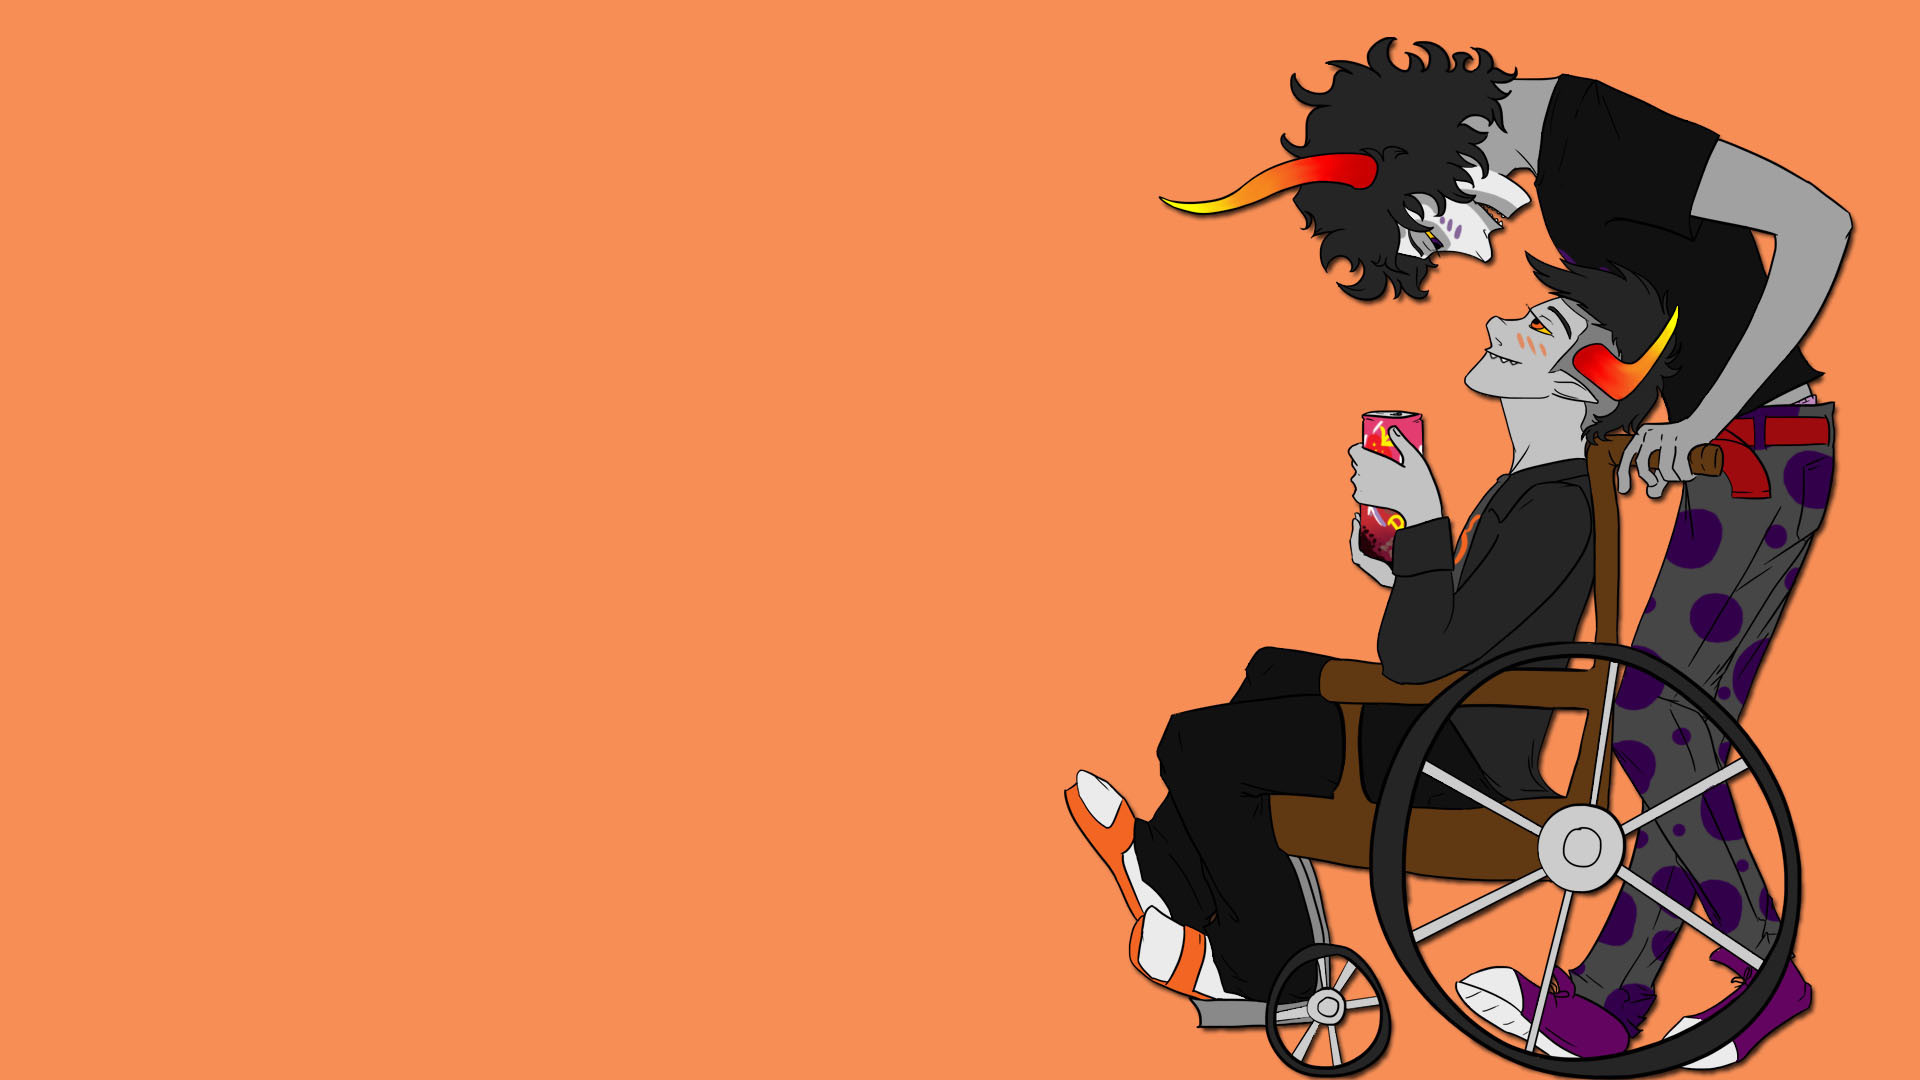 1920x1080  ... Homestuck: Gamzee and Tavros by SurlySkies